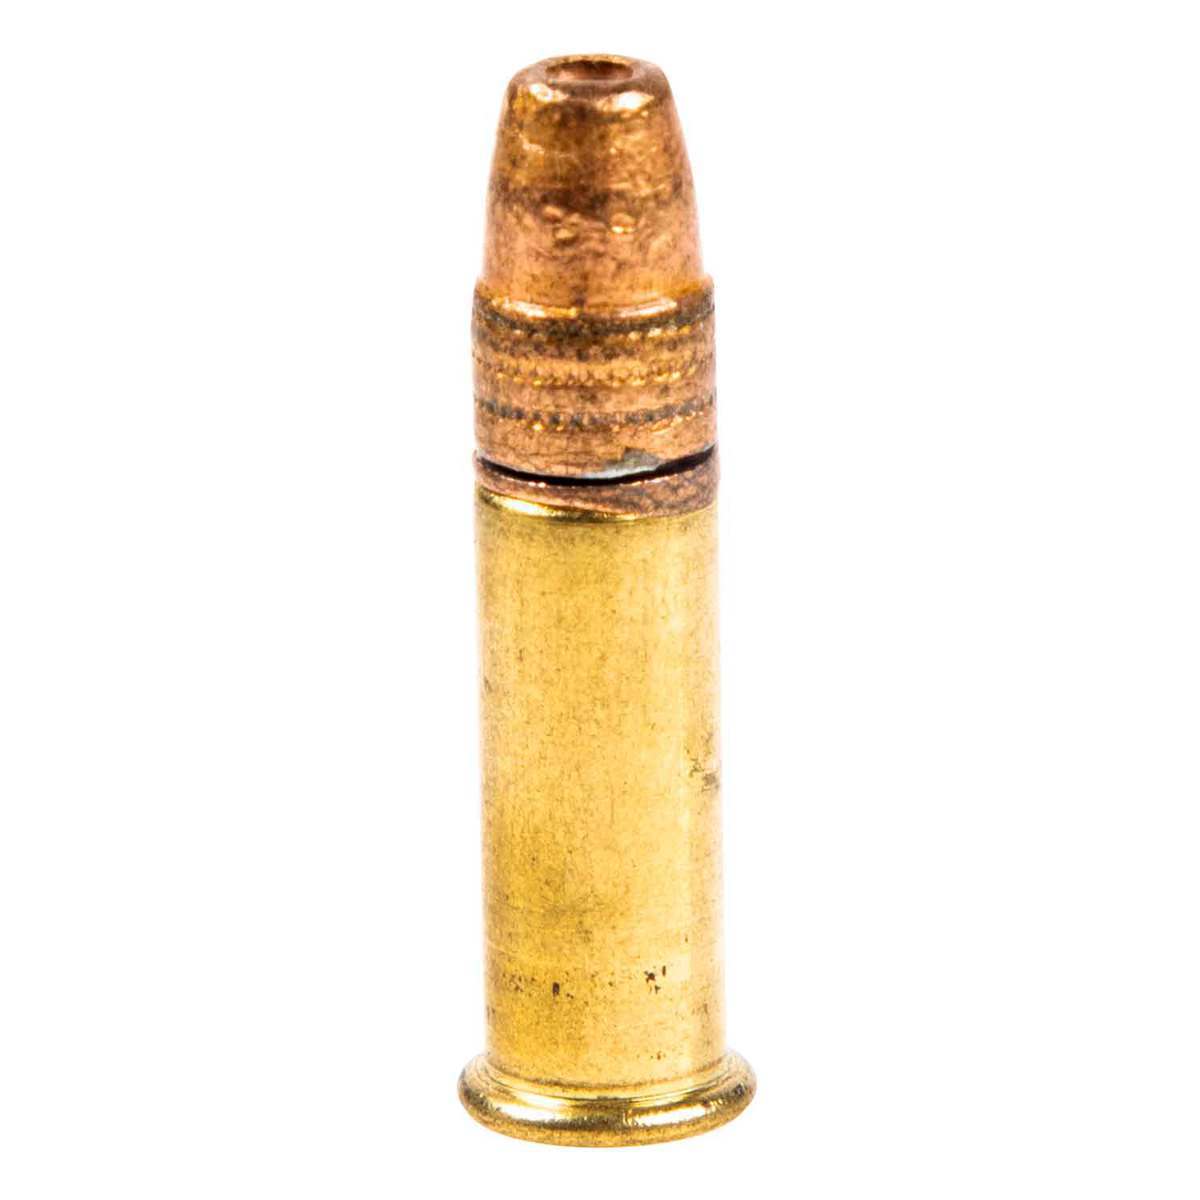 browning-bpr-22-long-rifle-40gr-hollow-point-rimfire-ammo-100-rounds